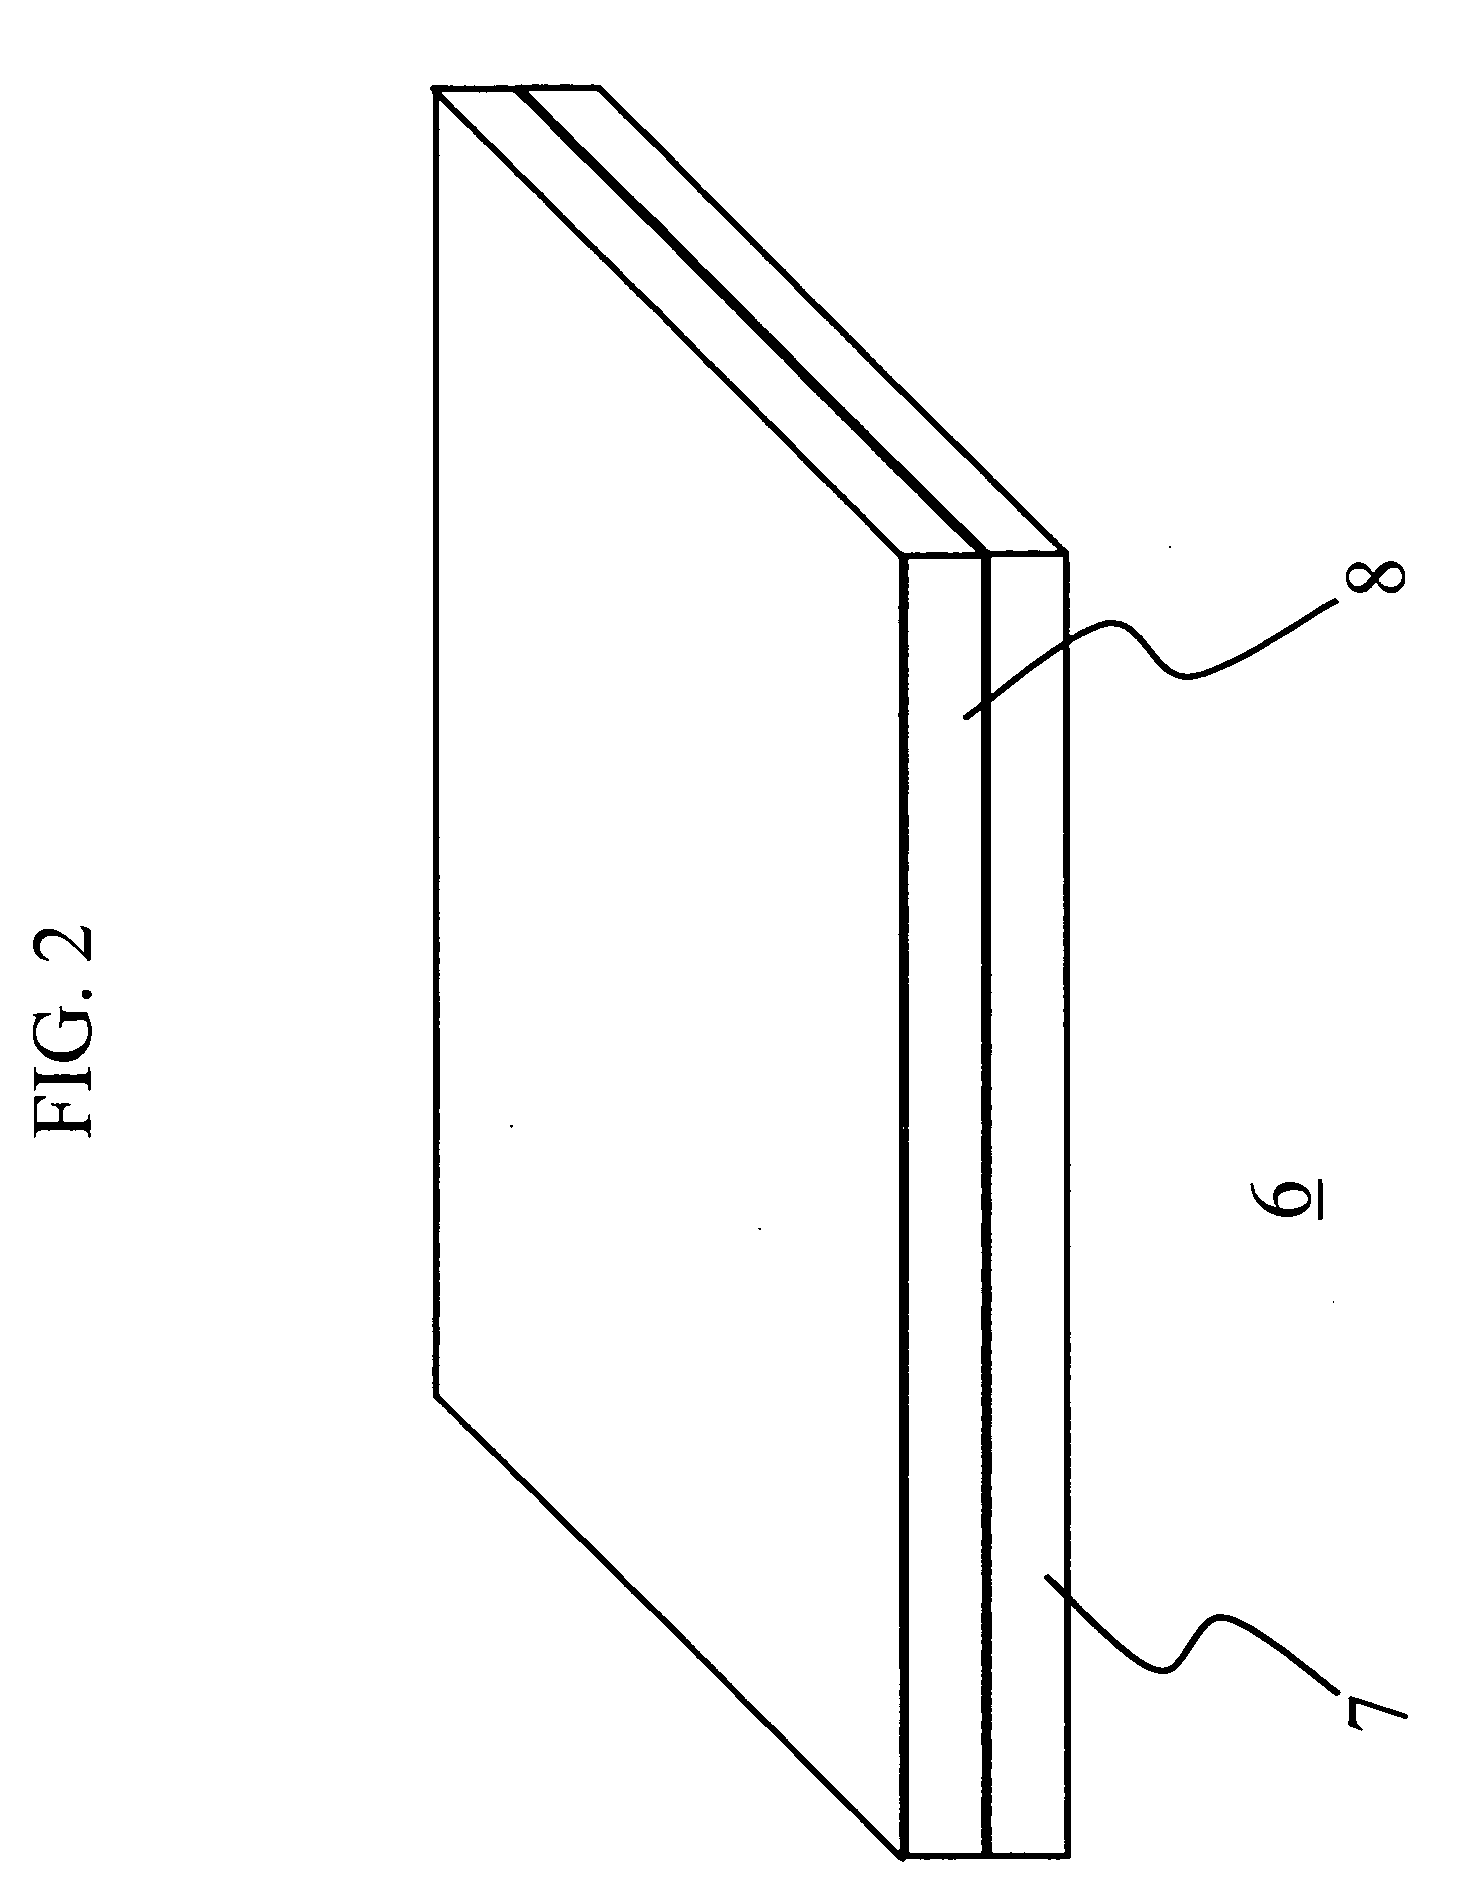 Epoxy Resin Composition for Carbon-Fiber-Reinforced Composite Material, Prepreg, Integrated Molding, Fiber-Reinforced Composite Sheet, and Casing for Electrical/Electronic Equipment